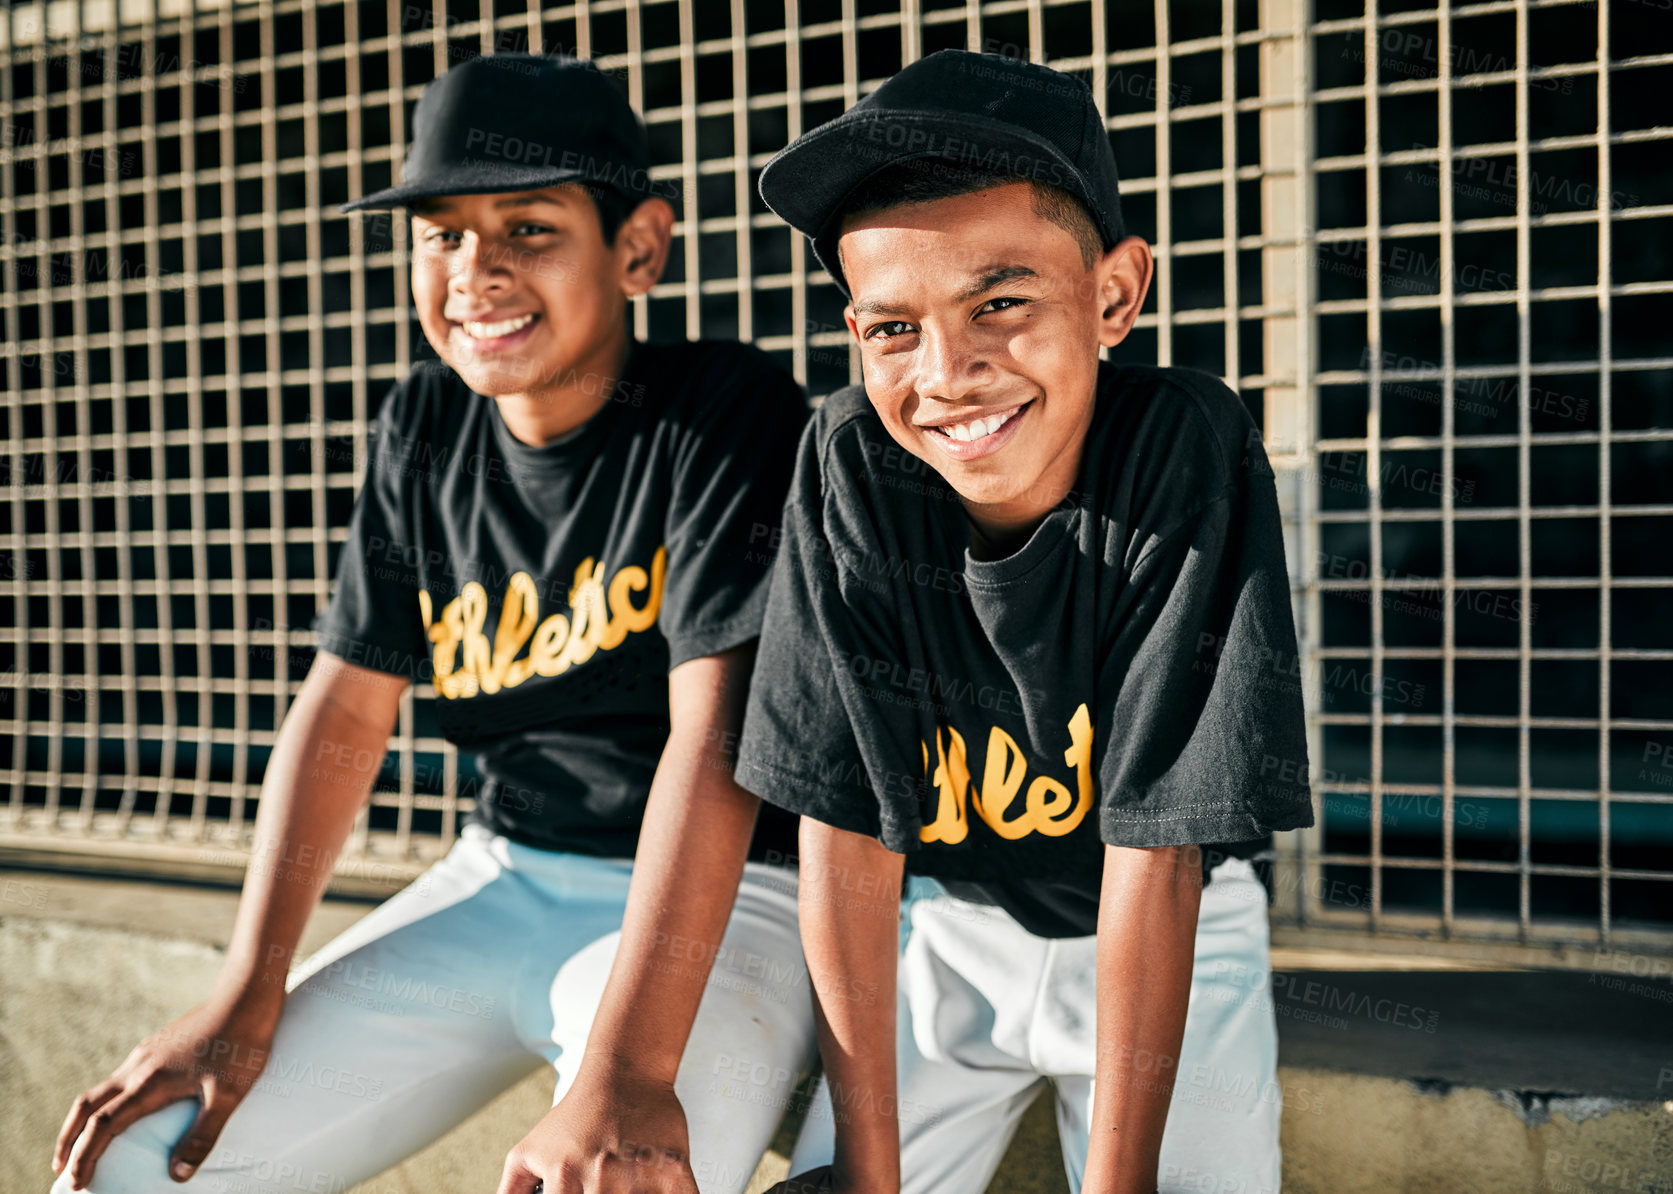 Buy stock photo Portrait of two young baseball players sitting together